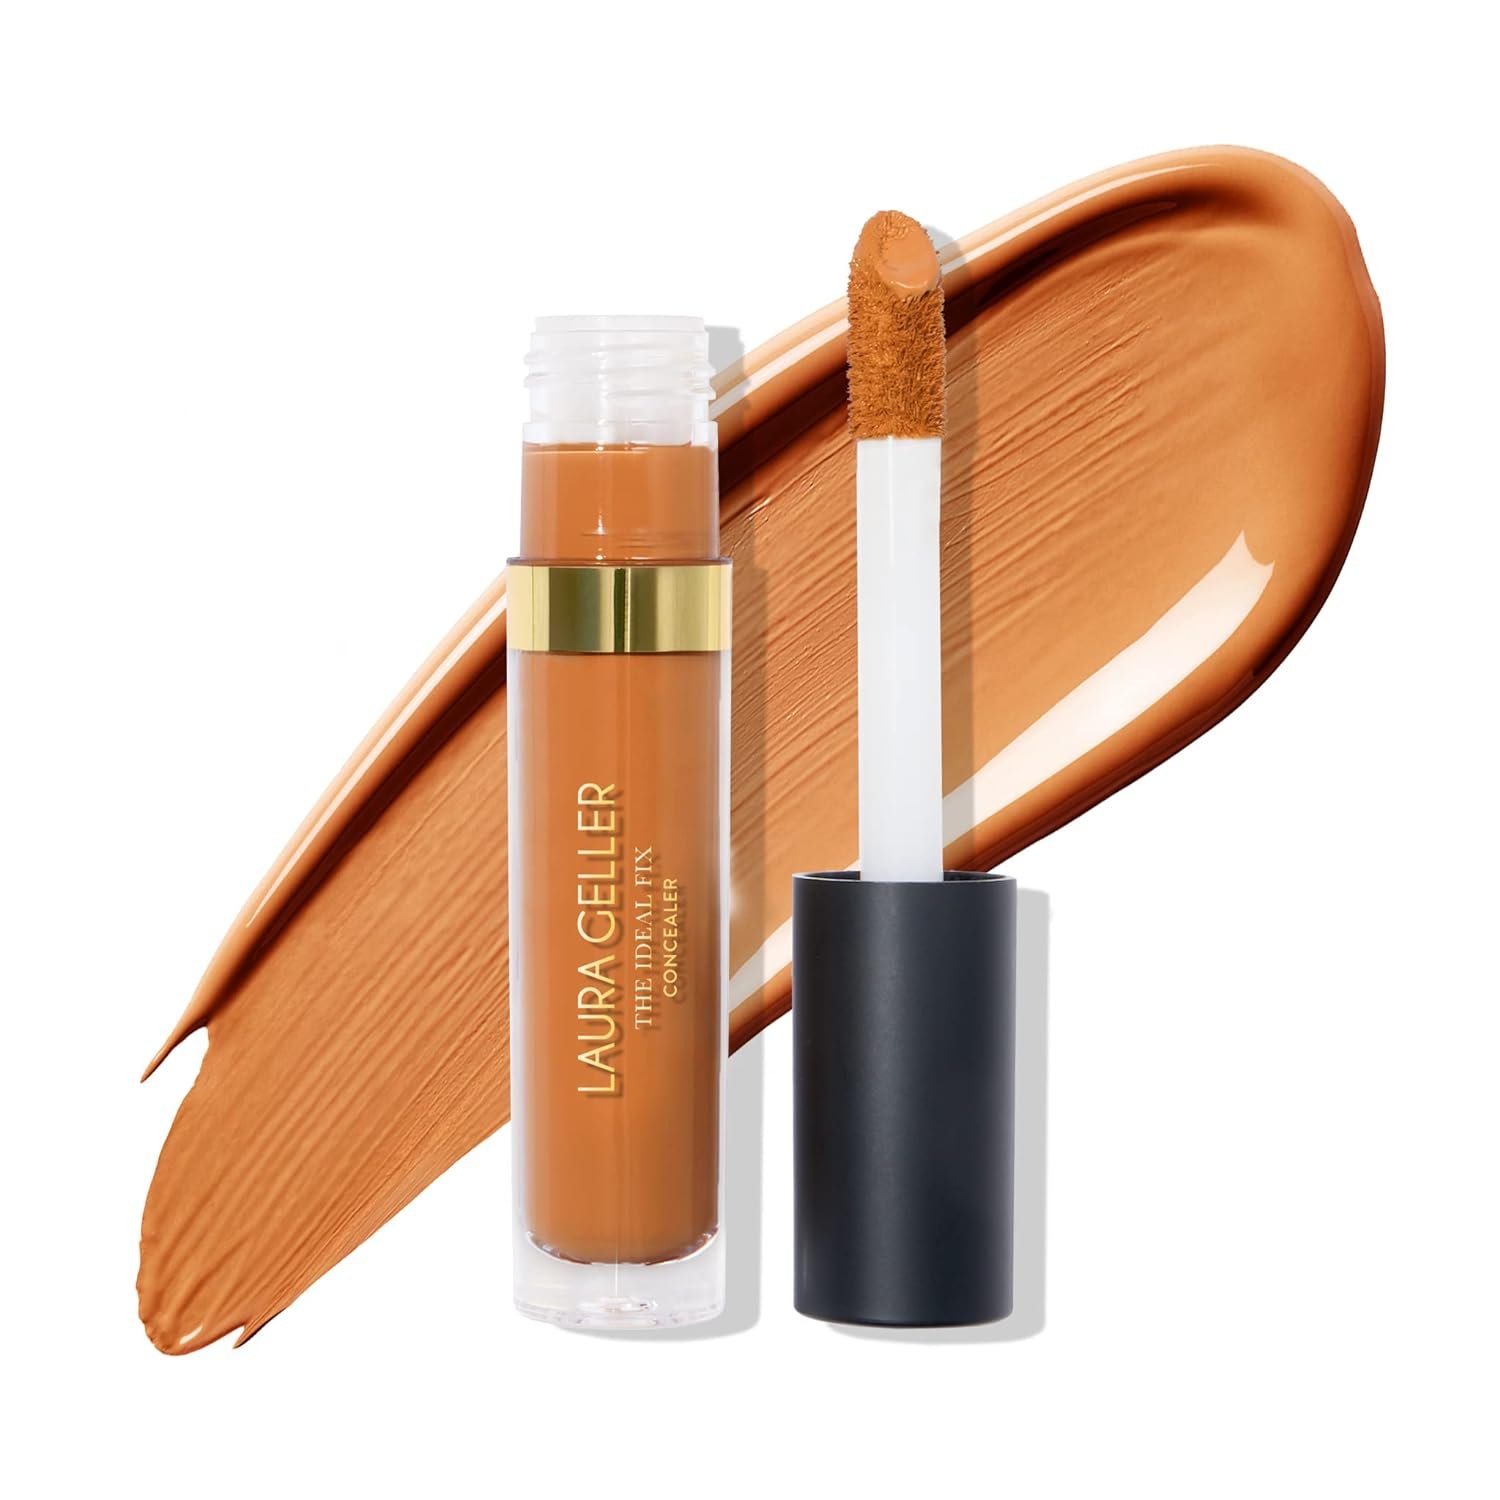 LAURA GELLER NEW YORK The Ideal Fix Concealer - Porcelain - Buildable Medium to Full Coverage Liquid Concealer - Covers Under Eye Dark Circles  Blemishes - Long-Lasting